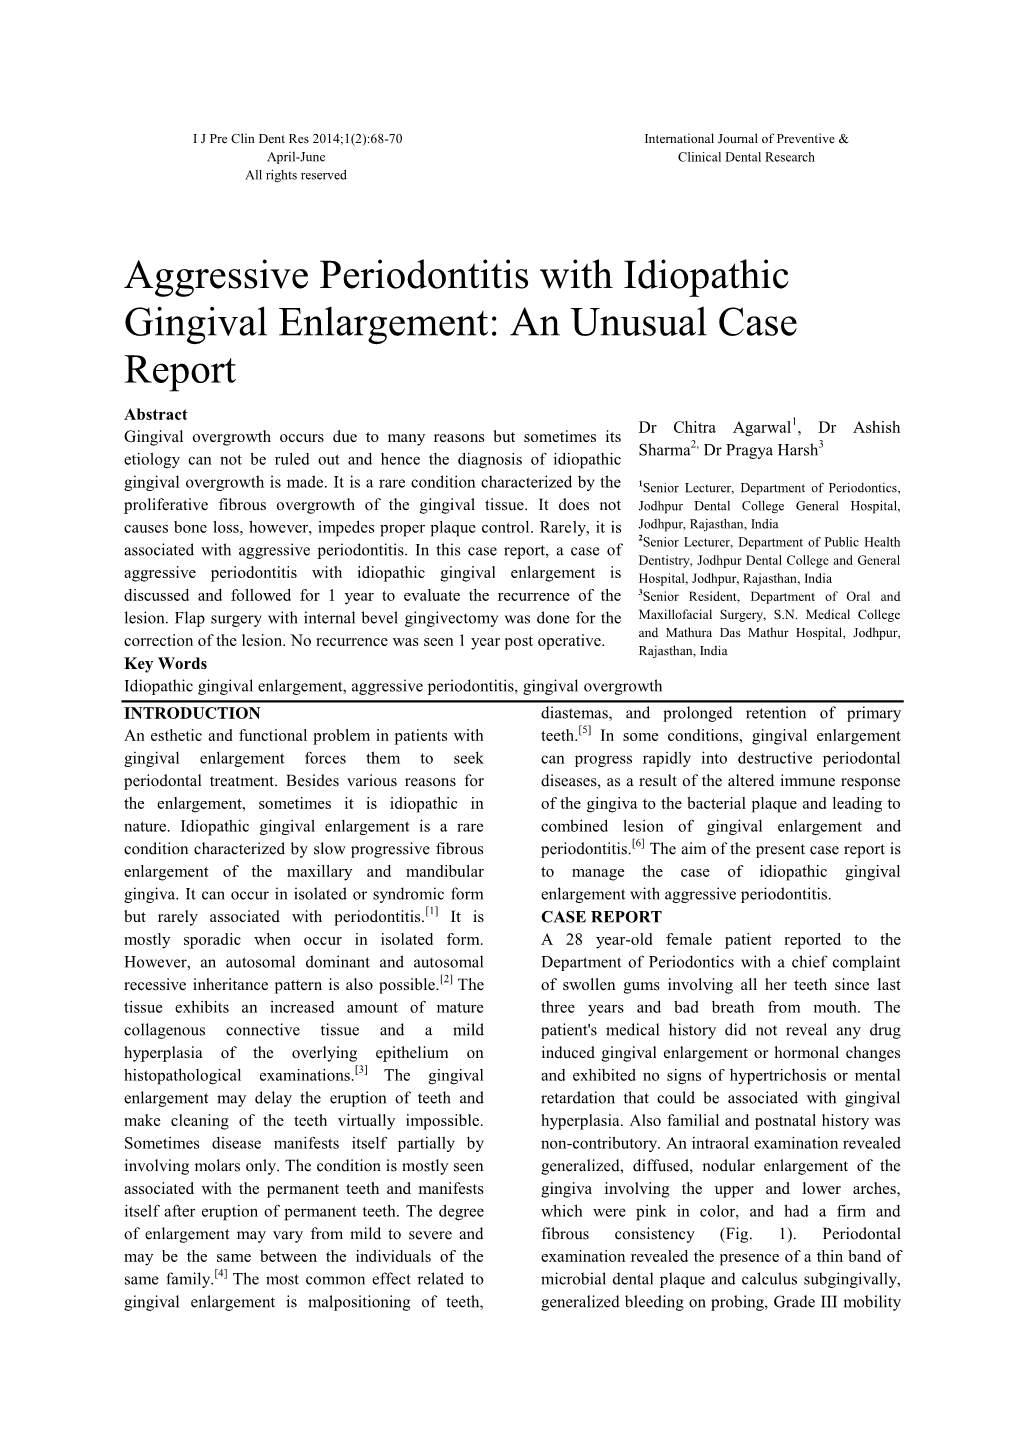 Aggressive Periodontitis with Idiopathic Gingival Enlargement: an Unusual Case Report